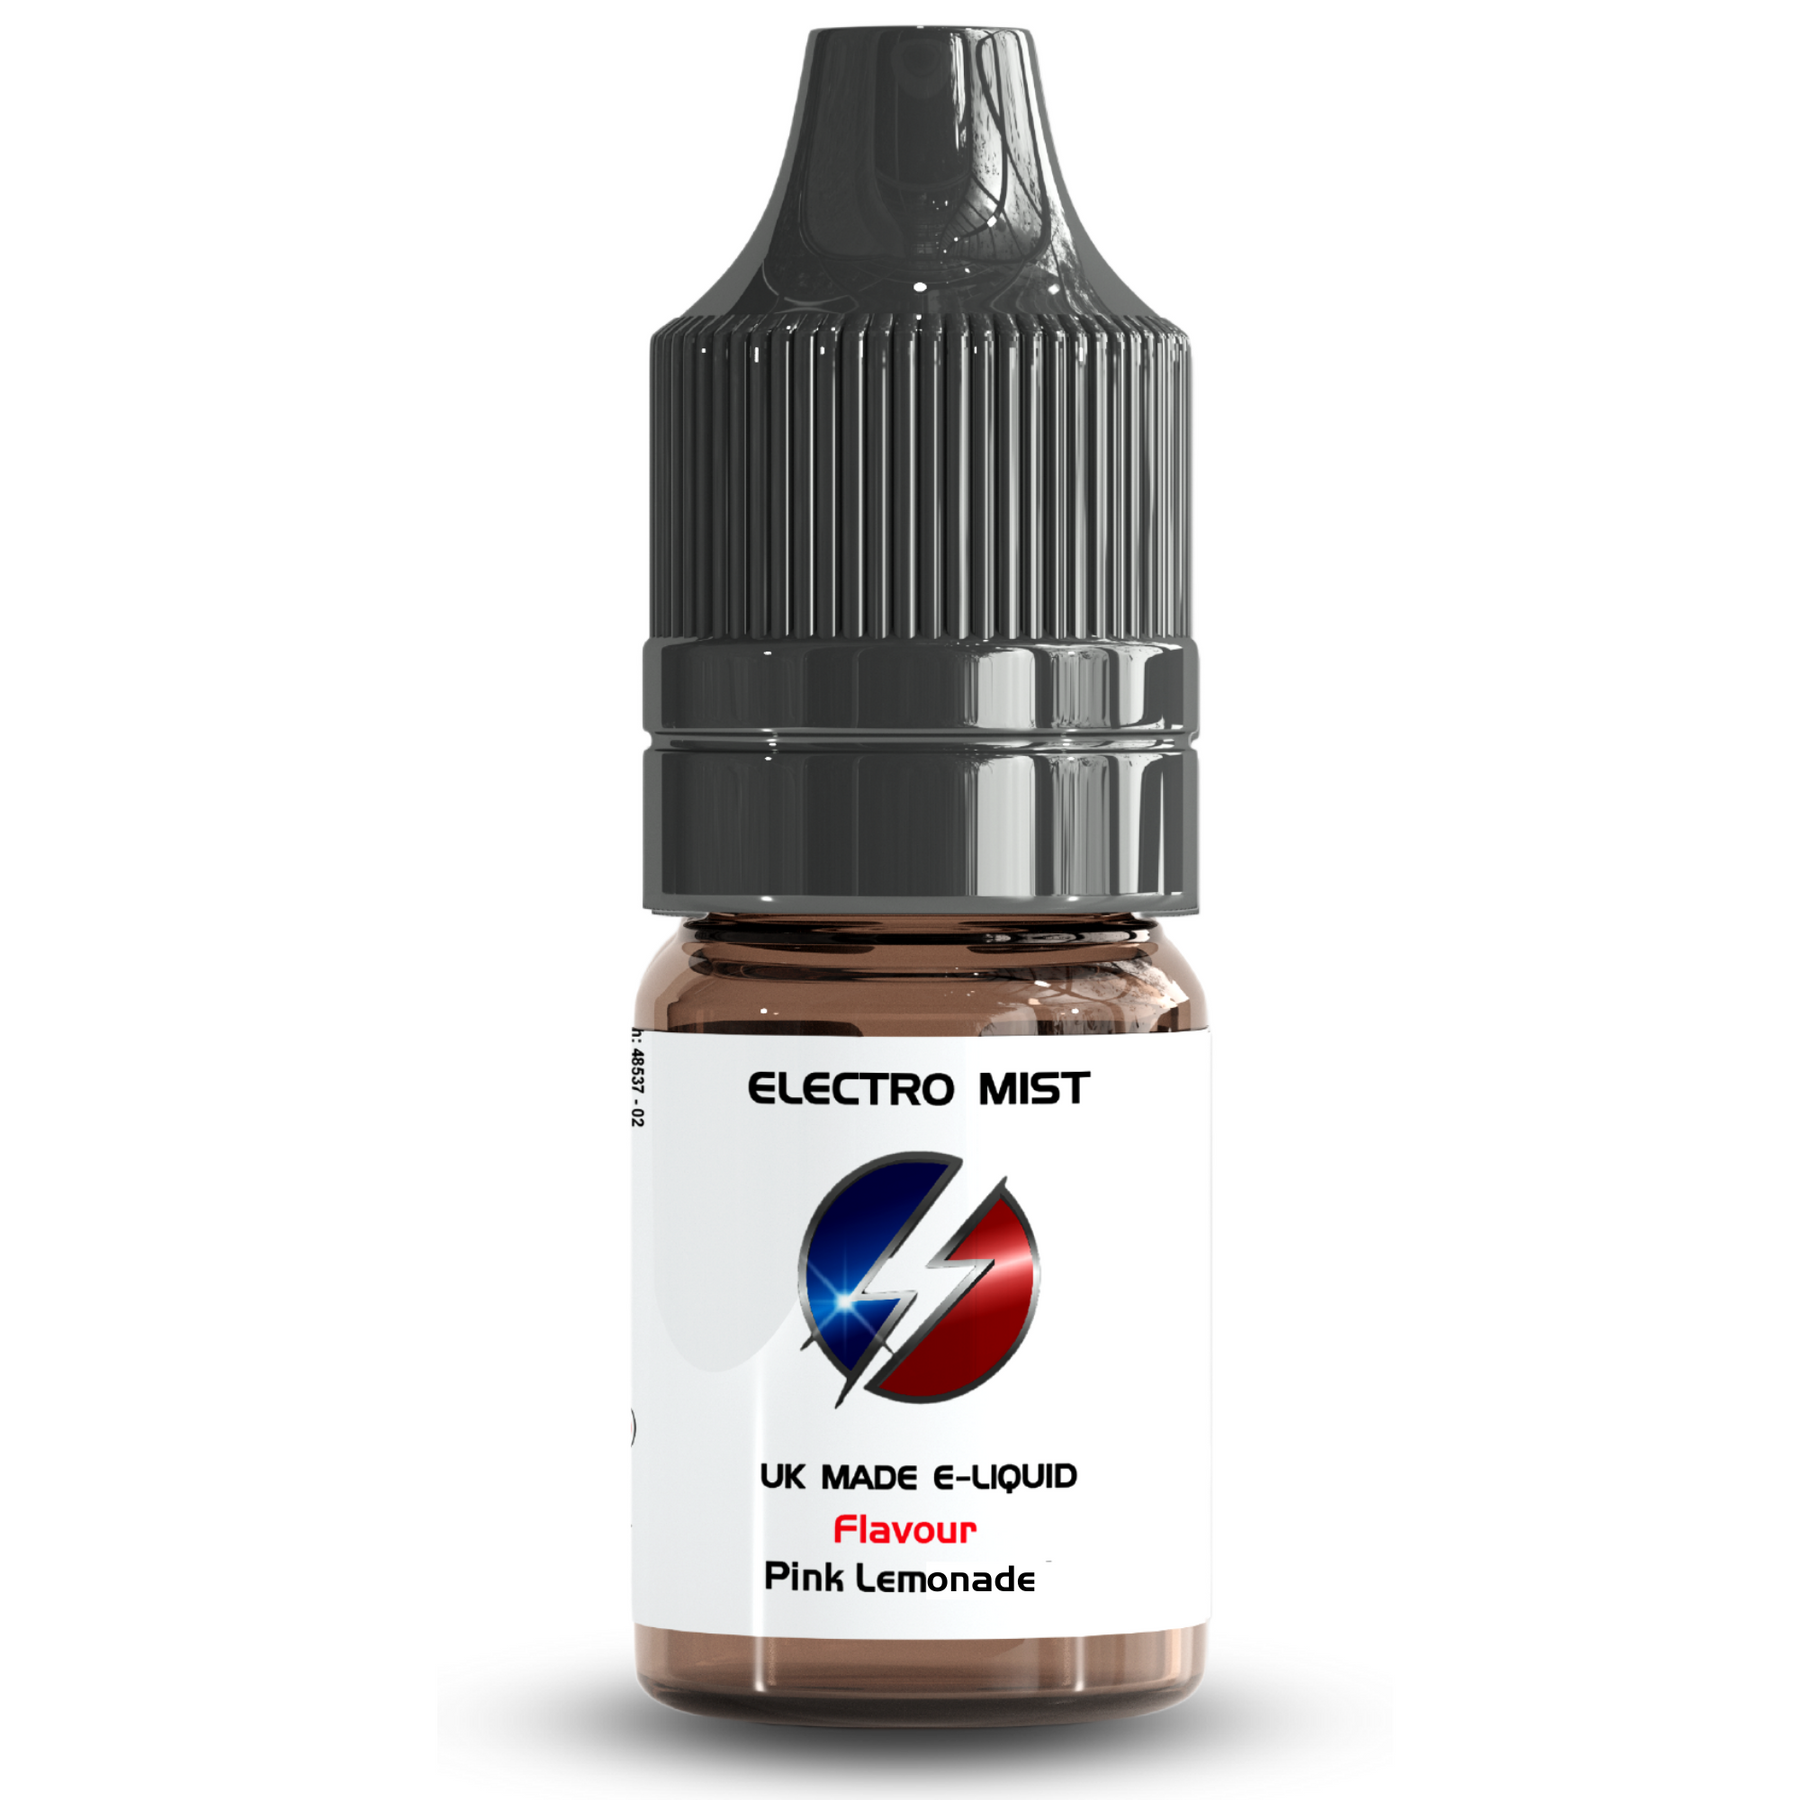 Electromist, the e-liquid brand you can trust. Get your taste buds ready for a flavour sensation, Pink Lemonade. Nicotine Content: 3mg/6mg/12mg. Products may contain nicotine. For over 18s Only ejuice, vape pen, eliquid, e cigarette, 10ml, vaping, cloud, PG, VG, 60/40, vape liquid, Flavour